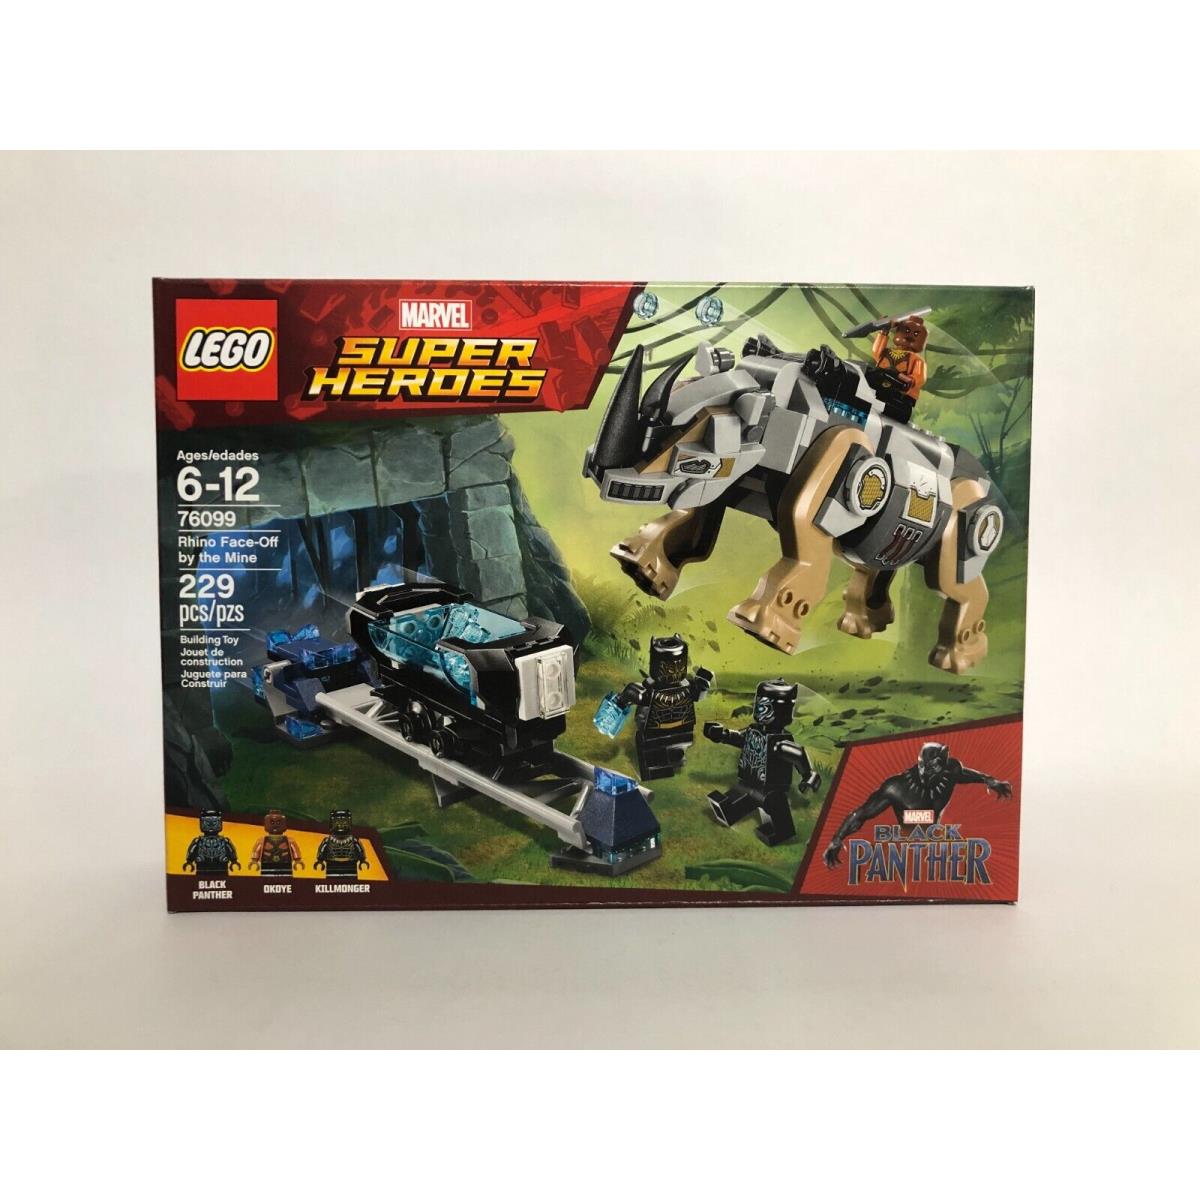 Lego Marvel Super Heroes 76099 Rhino Face-off by The Mine